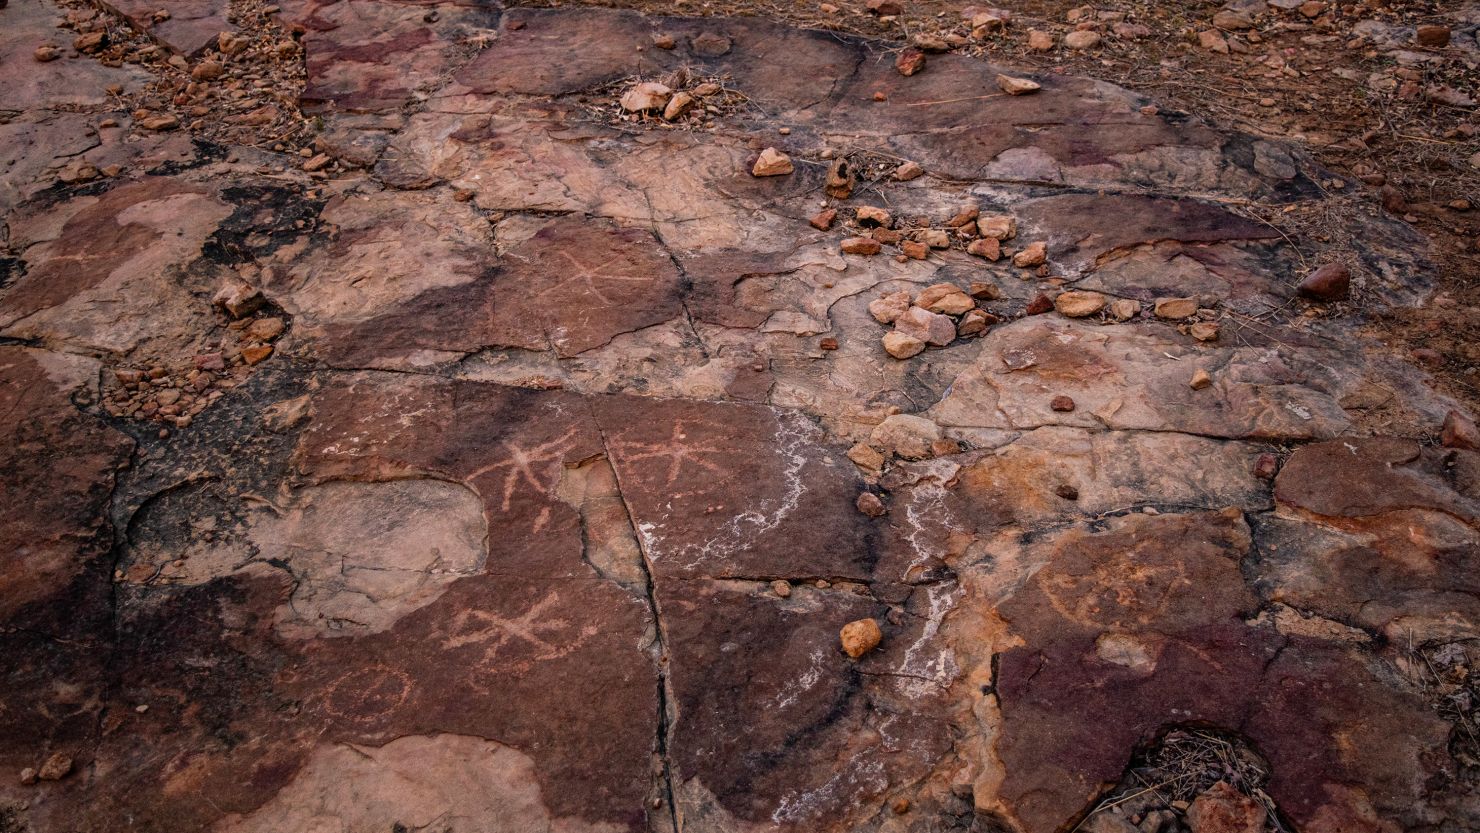 Called petroglyphs, these carvings are in the shape of stars or circles with internal divisions on a rocky outcrop where sauropod dinosaur footprints are found at the Serrote do Letreiro site in the Brazilian state of Paraíba.